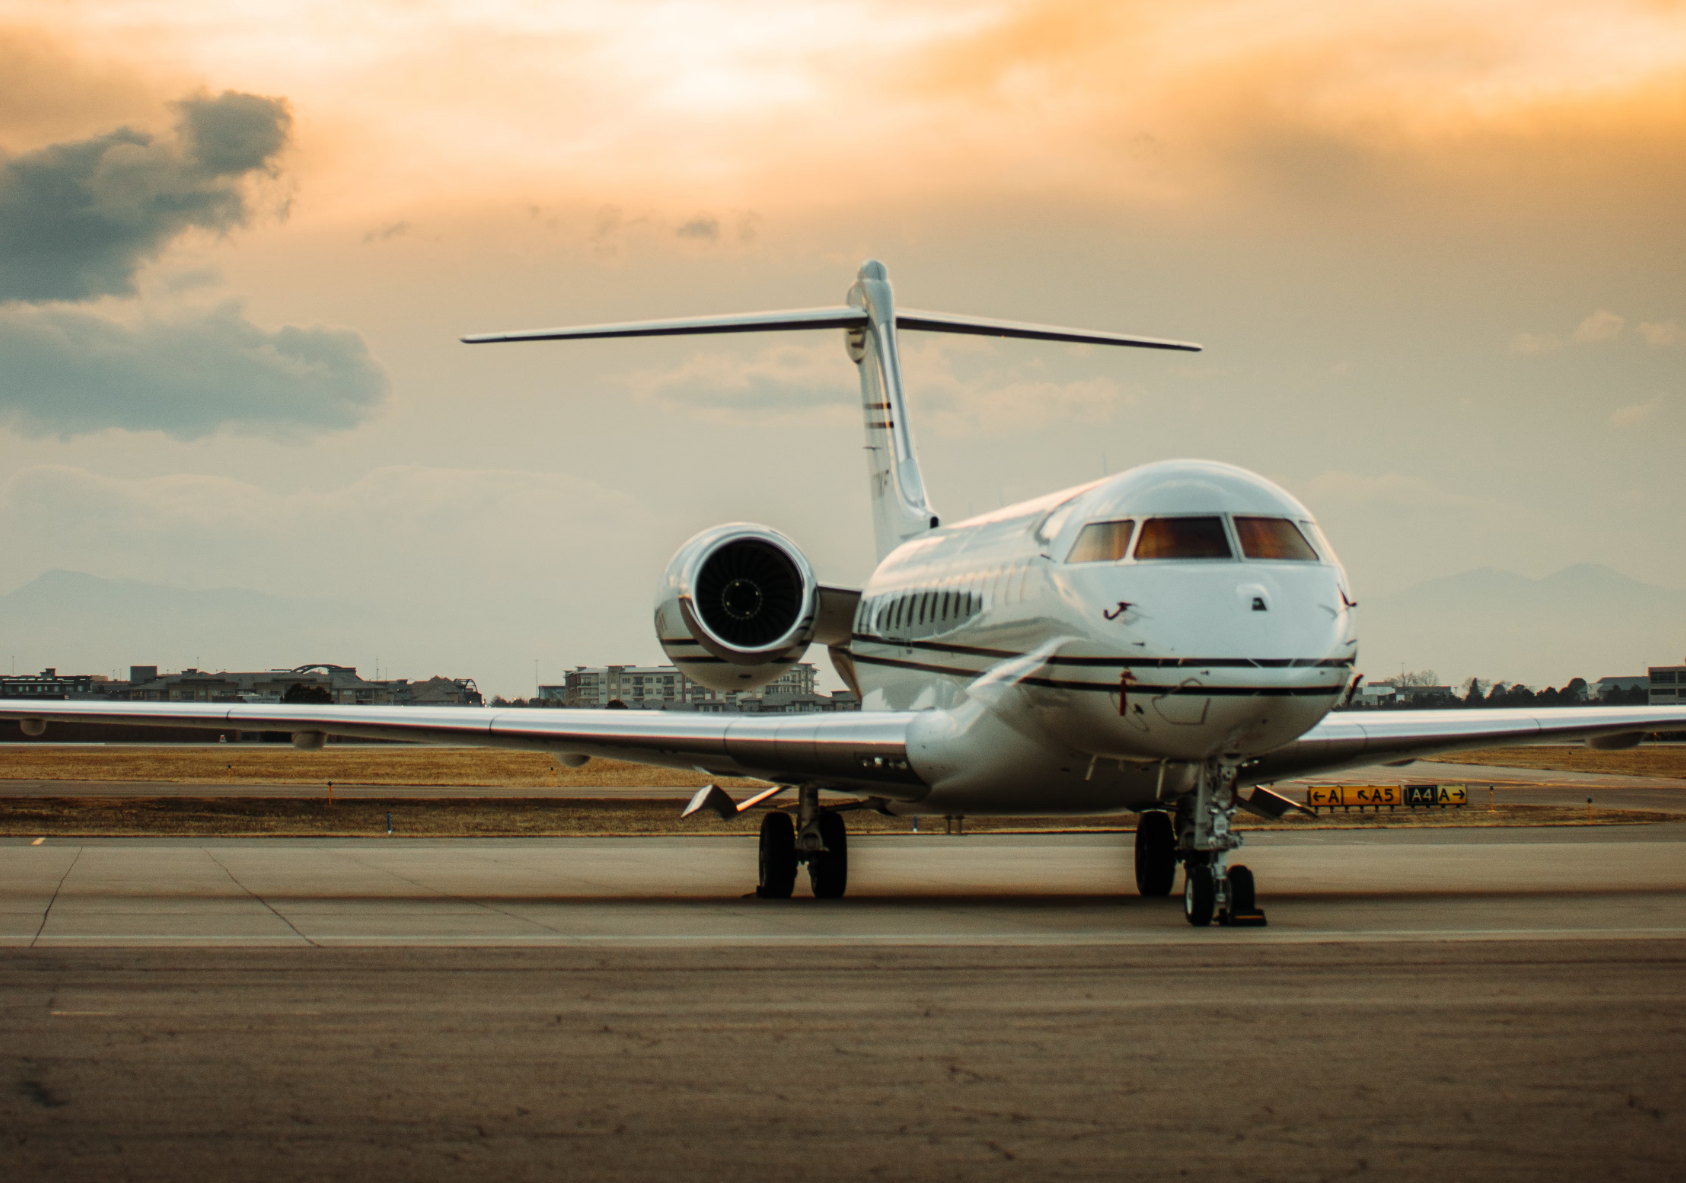 PRIVATE JET SALES EXPECTED TO SOAR TO AN ALL-TIME HIGH THIS YEAR